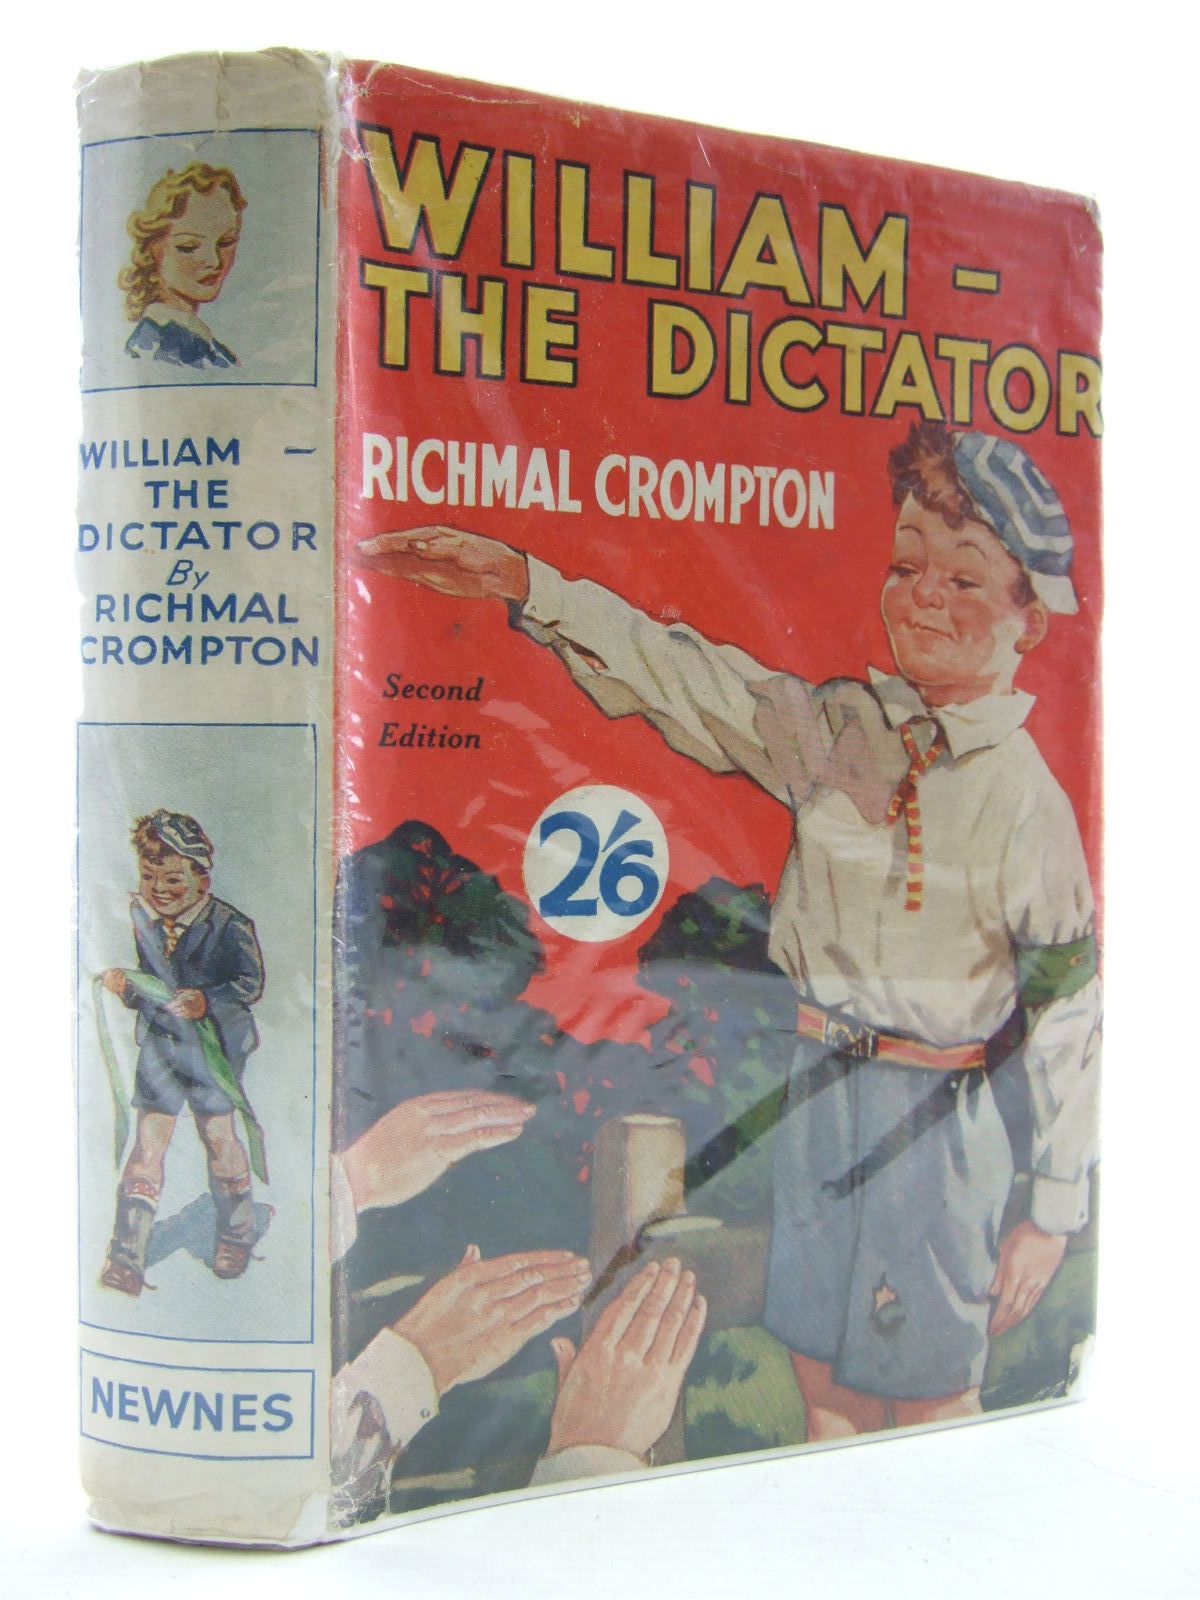 Cover of WILLIAM-THE DICTATOR by Richmal Crompton